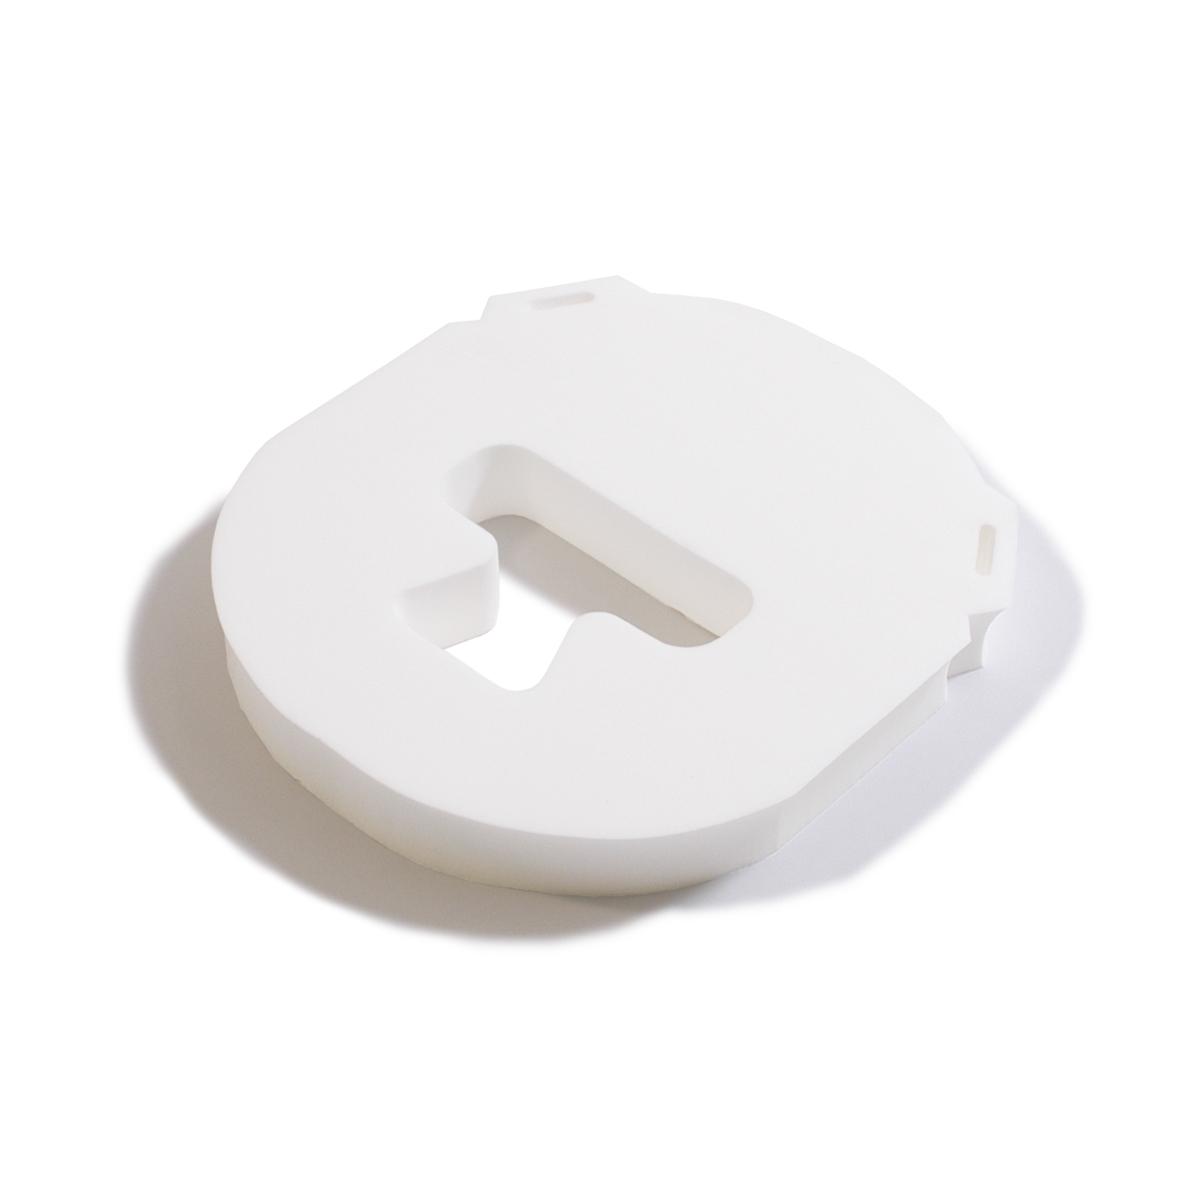 Comfort Mask Disposables, #A-70310, overhead view